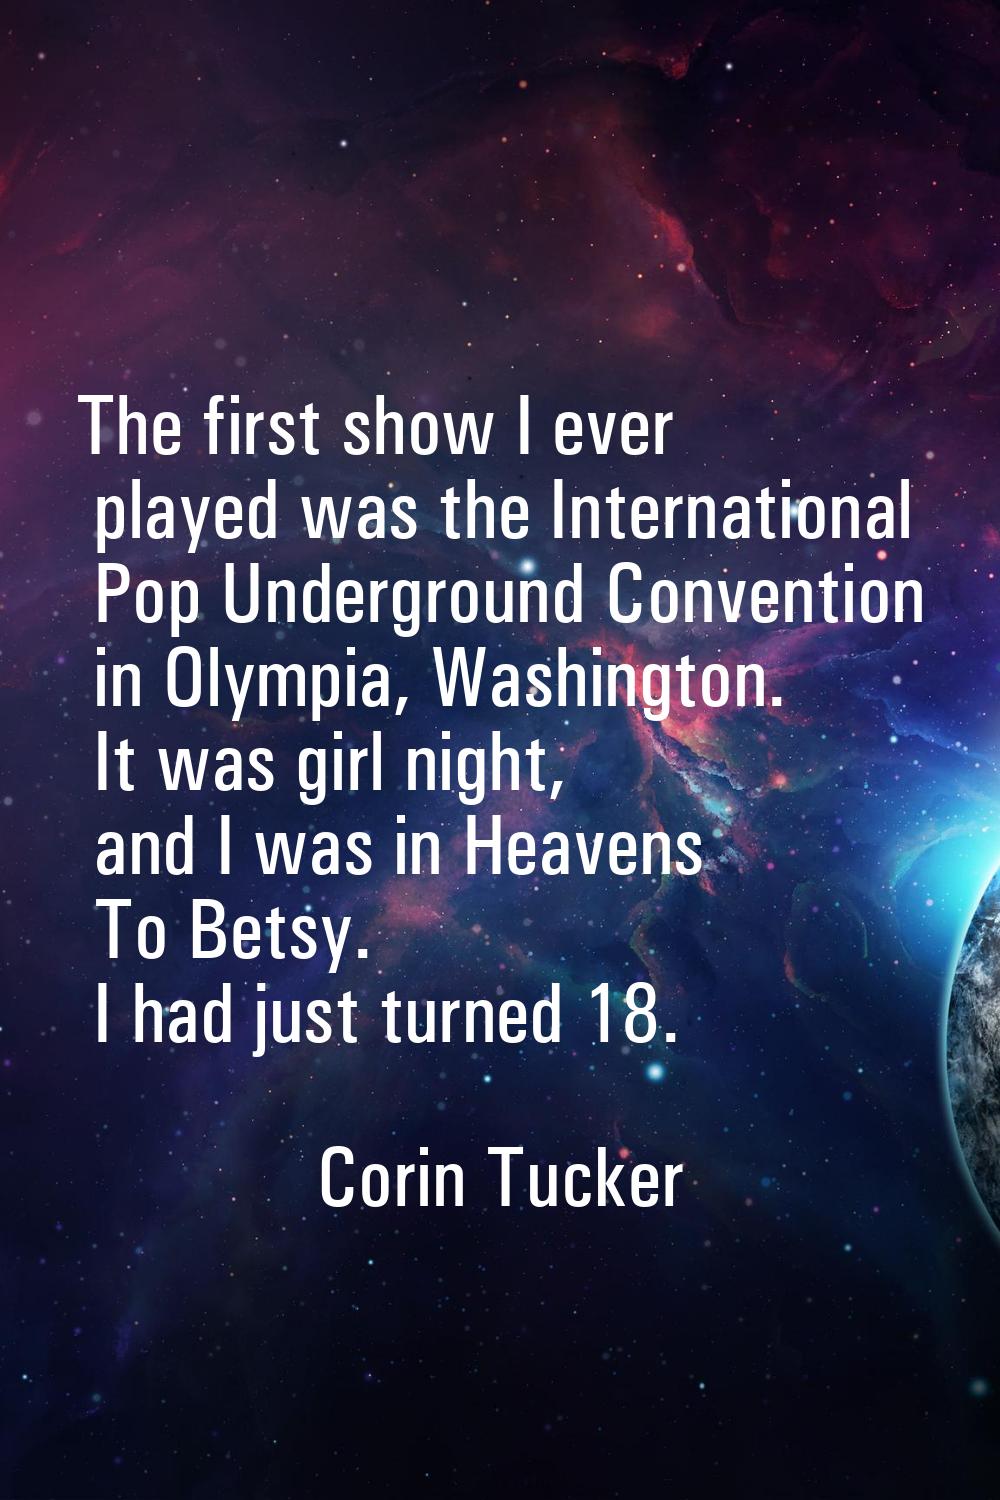 The first show I ever played was the International Pop Underground Convention in Olympia, Washingto